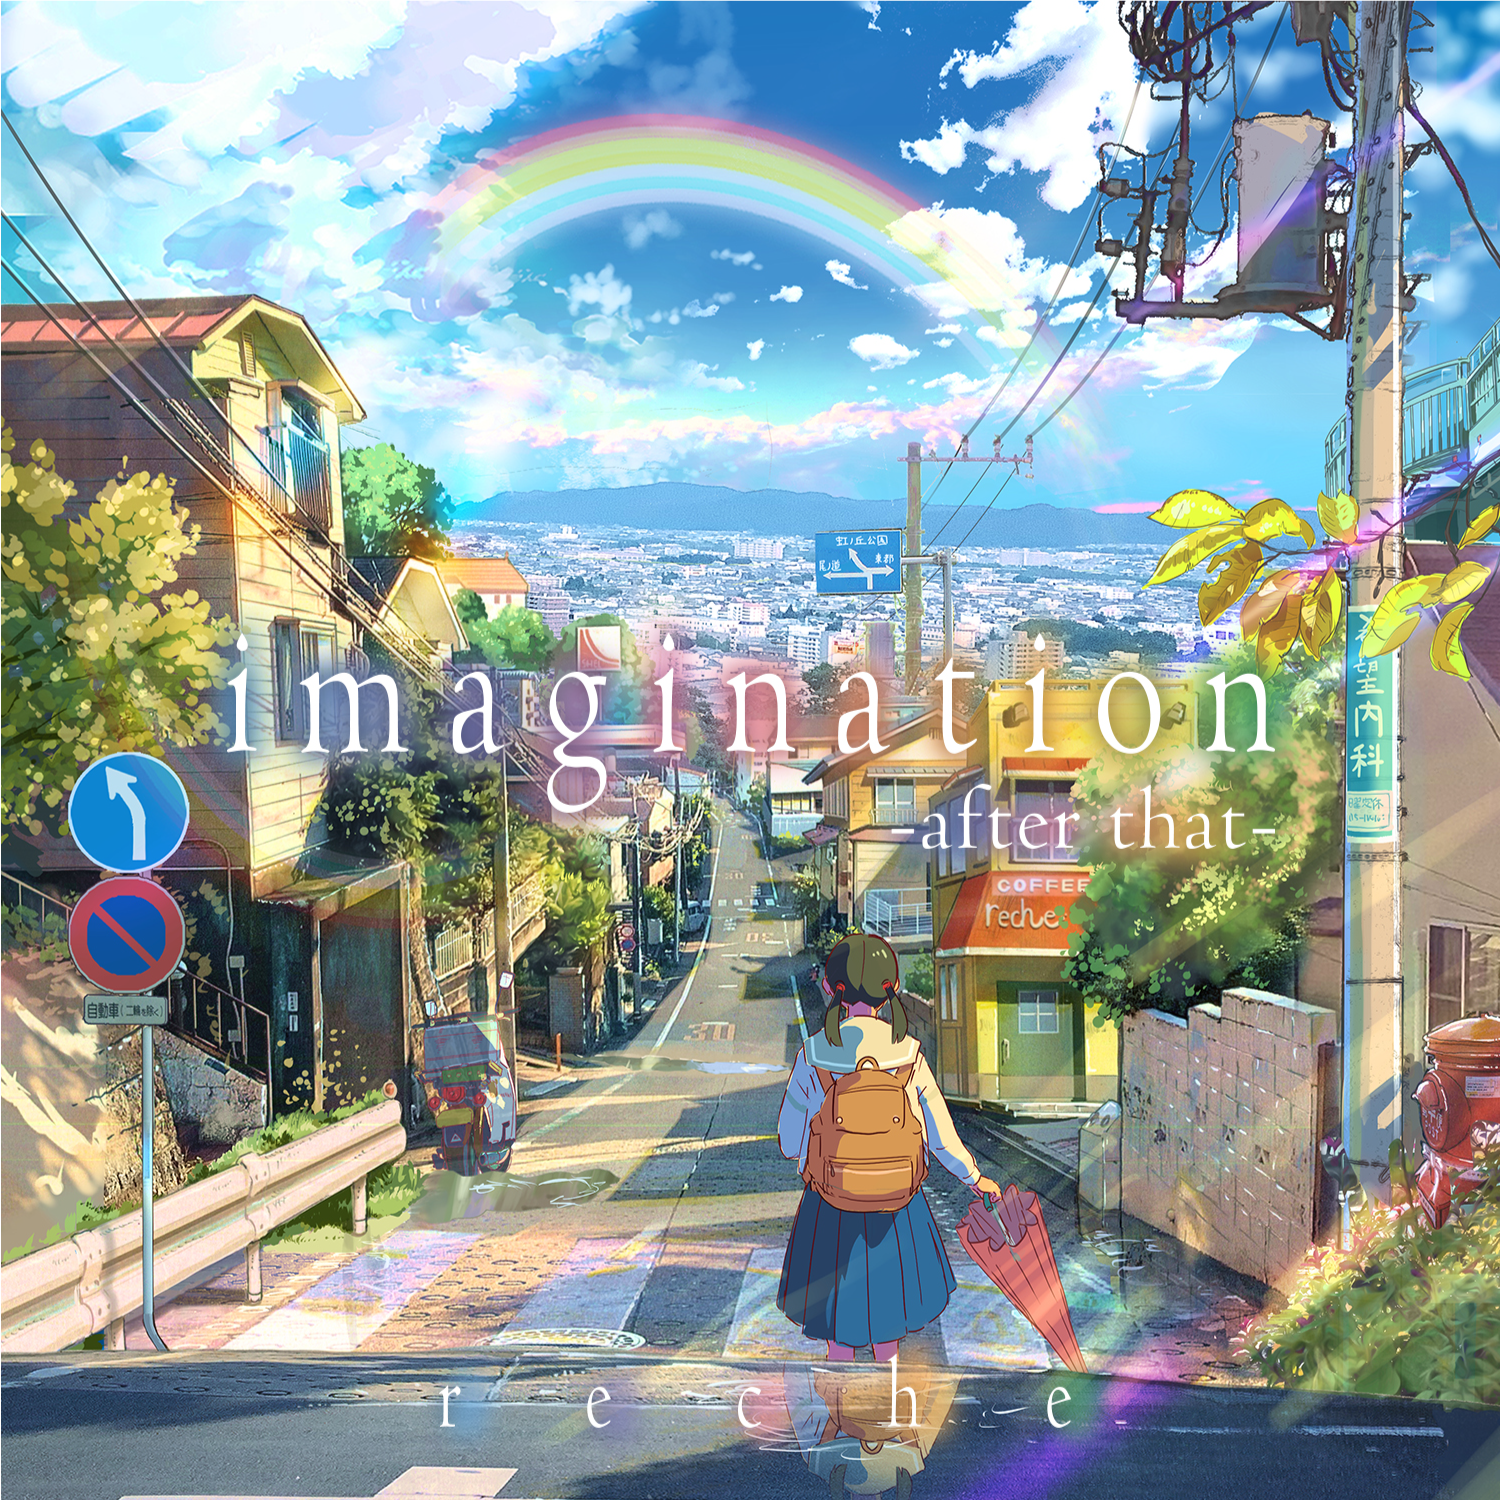 『imagination-after-that-』